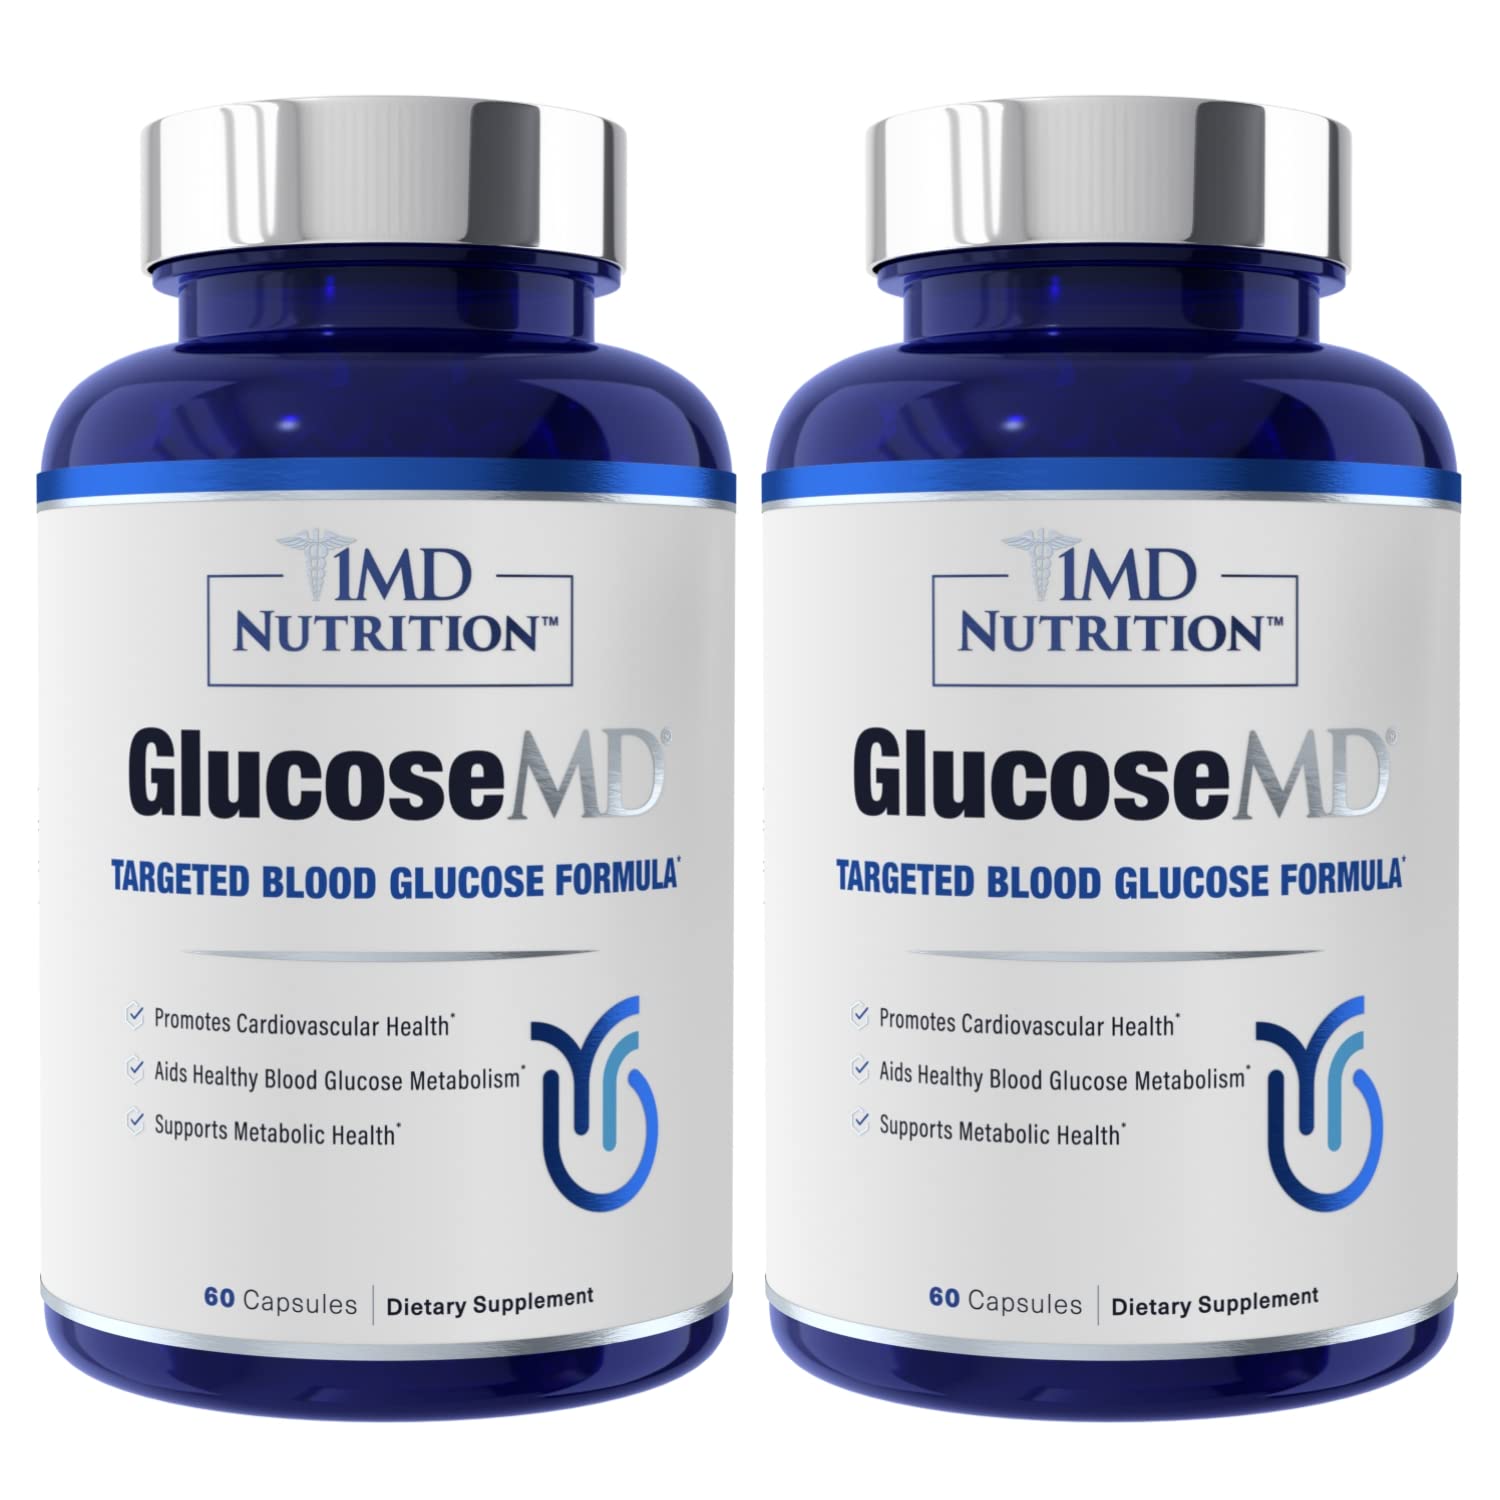 1MD Nutrition GlucoseMD - with Patented Cinnamon Extract, Chromium, Berberine | 60 Capsules (2-Pack)